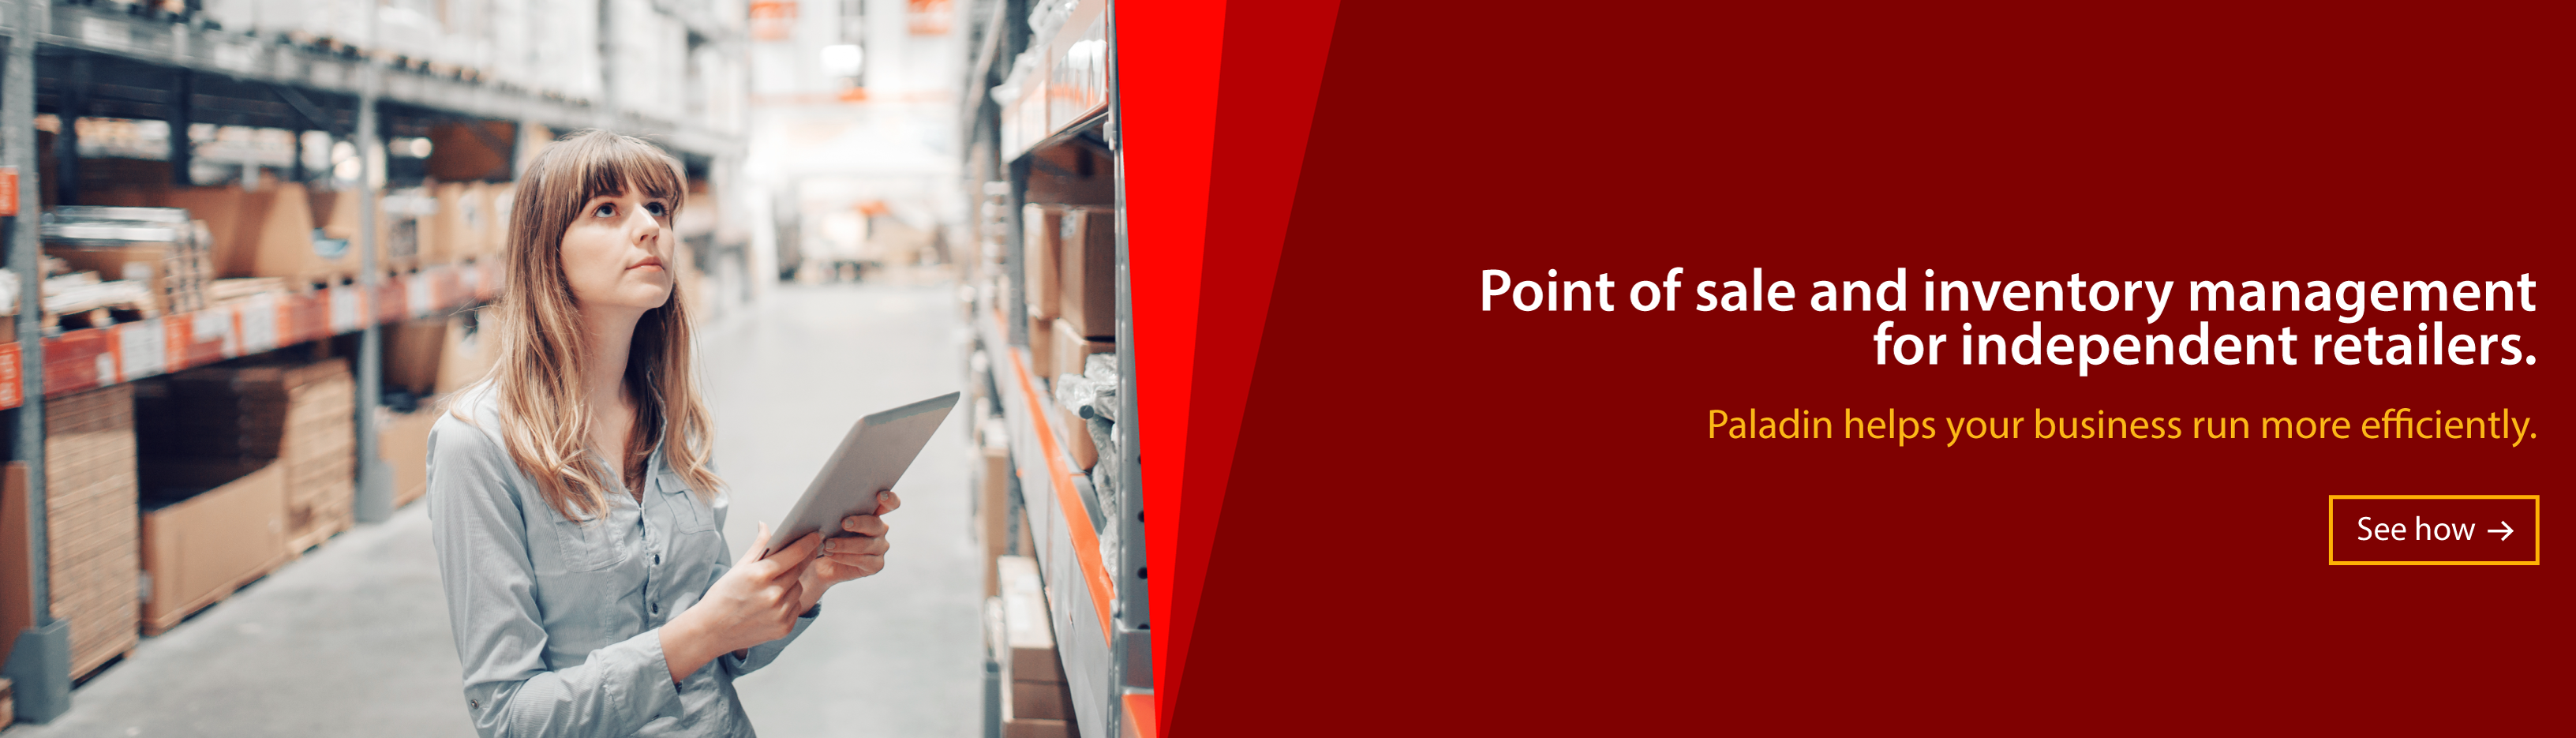 Point of sale and inventory management for independent retailers